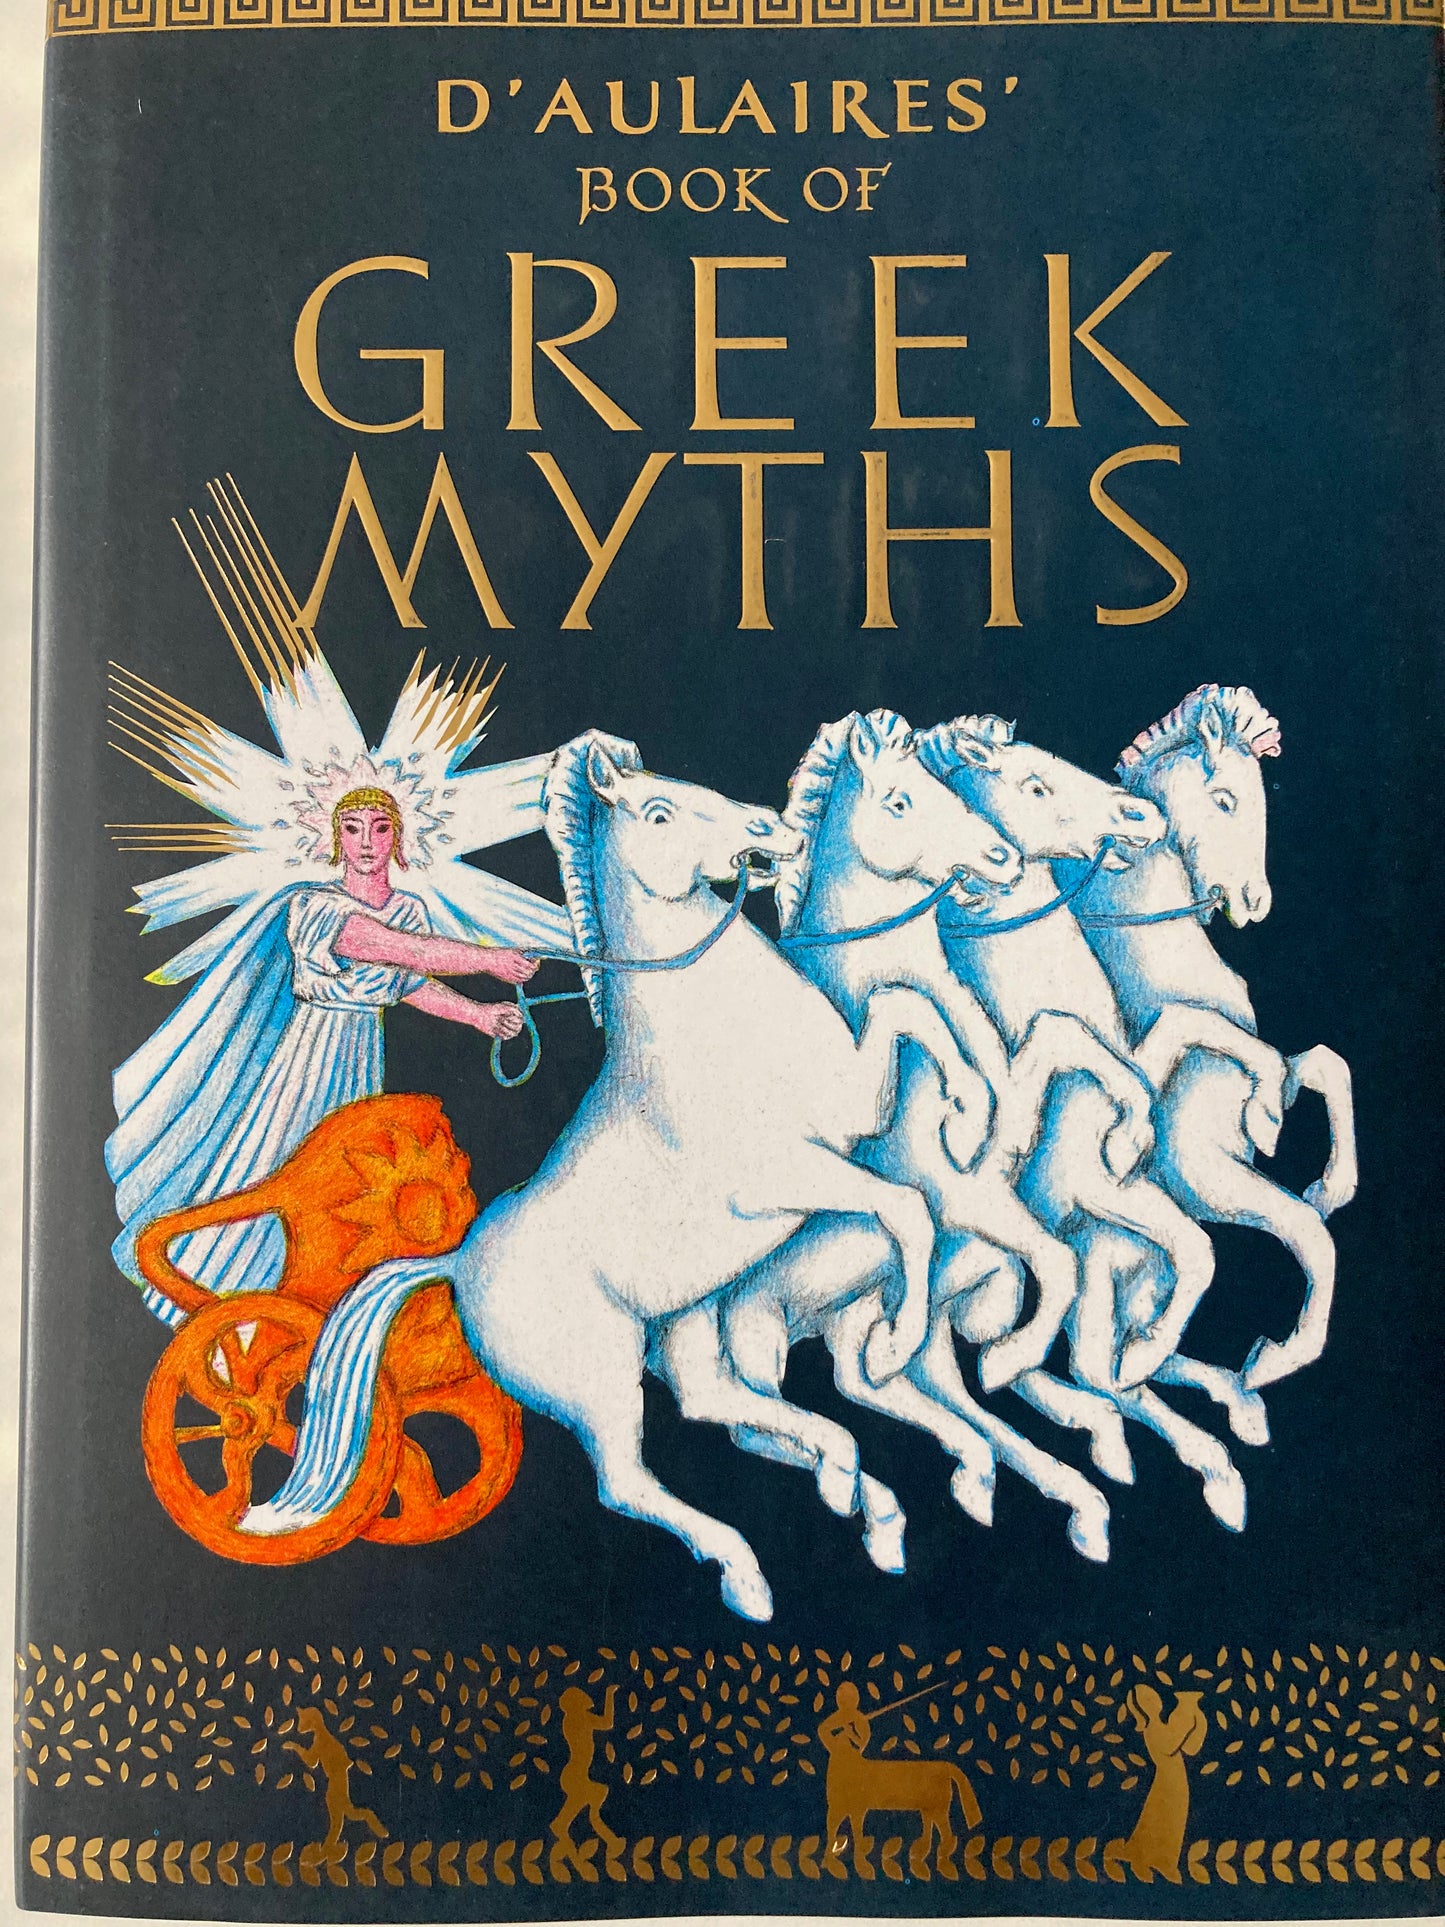 Educational Chapter Book - D'AULAIRES' BOOK OF GREEK MYTHS